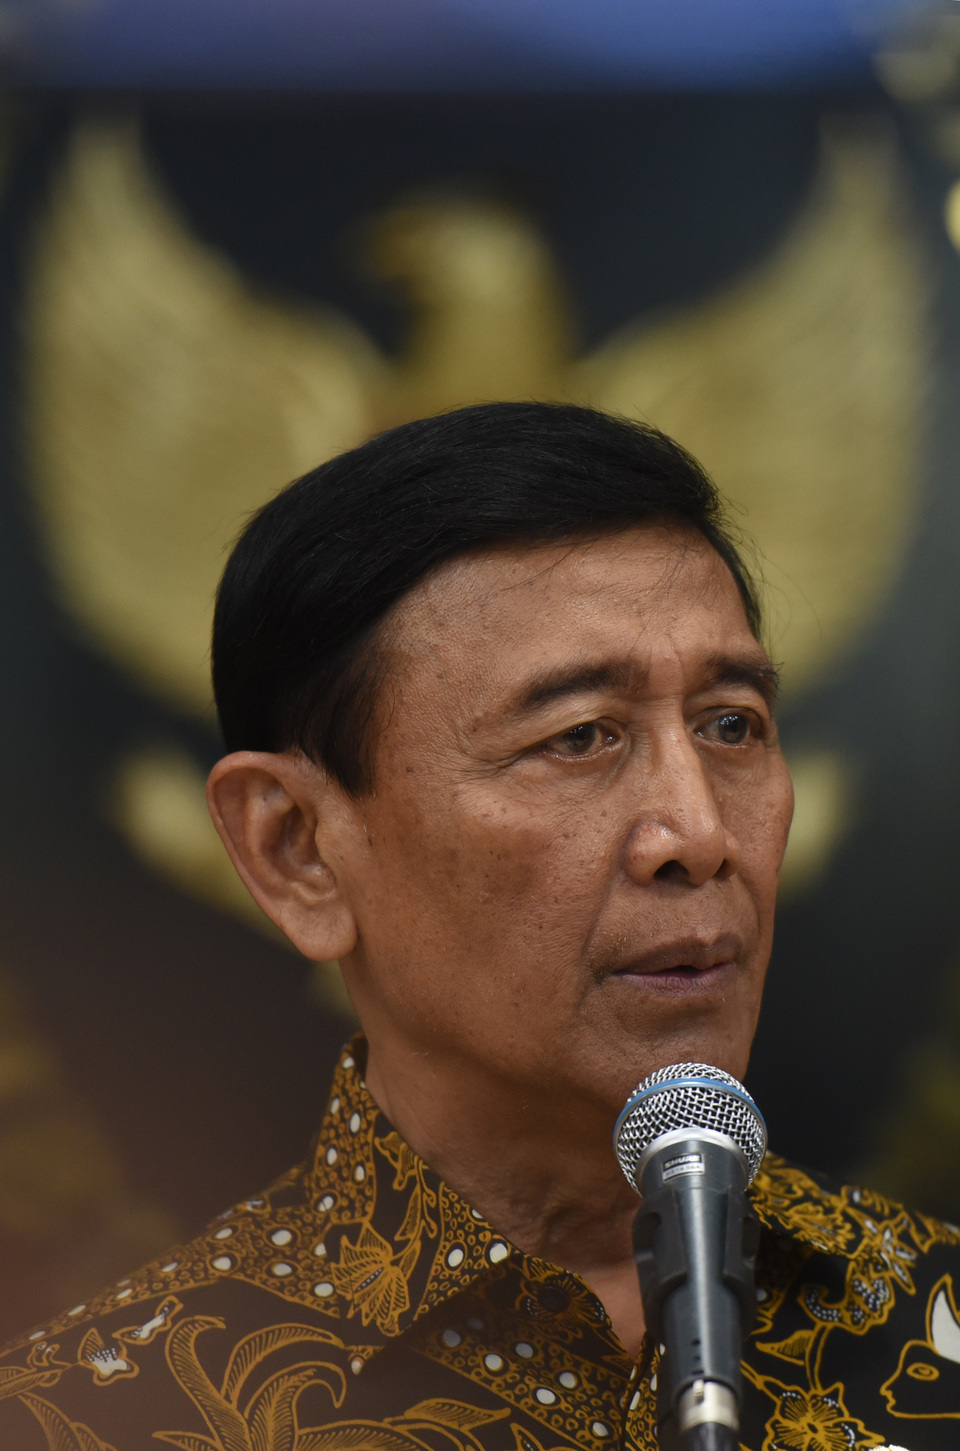 Chief Security Minister Wiranto briefed Indonesian diplomats on changing world dynamics and touched on the importance of understanding present challenges during a meeting in Jakarta on Tuesday (13/02). (Antara Photo/Akbar Nugroho Gumay)